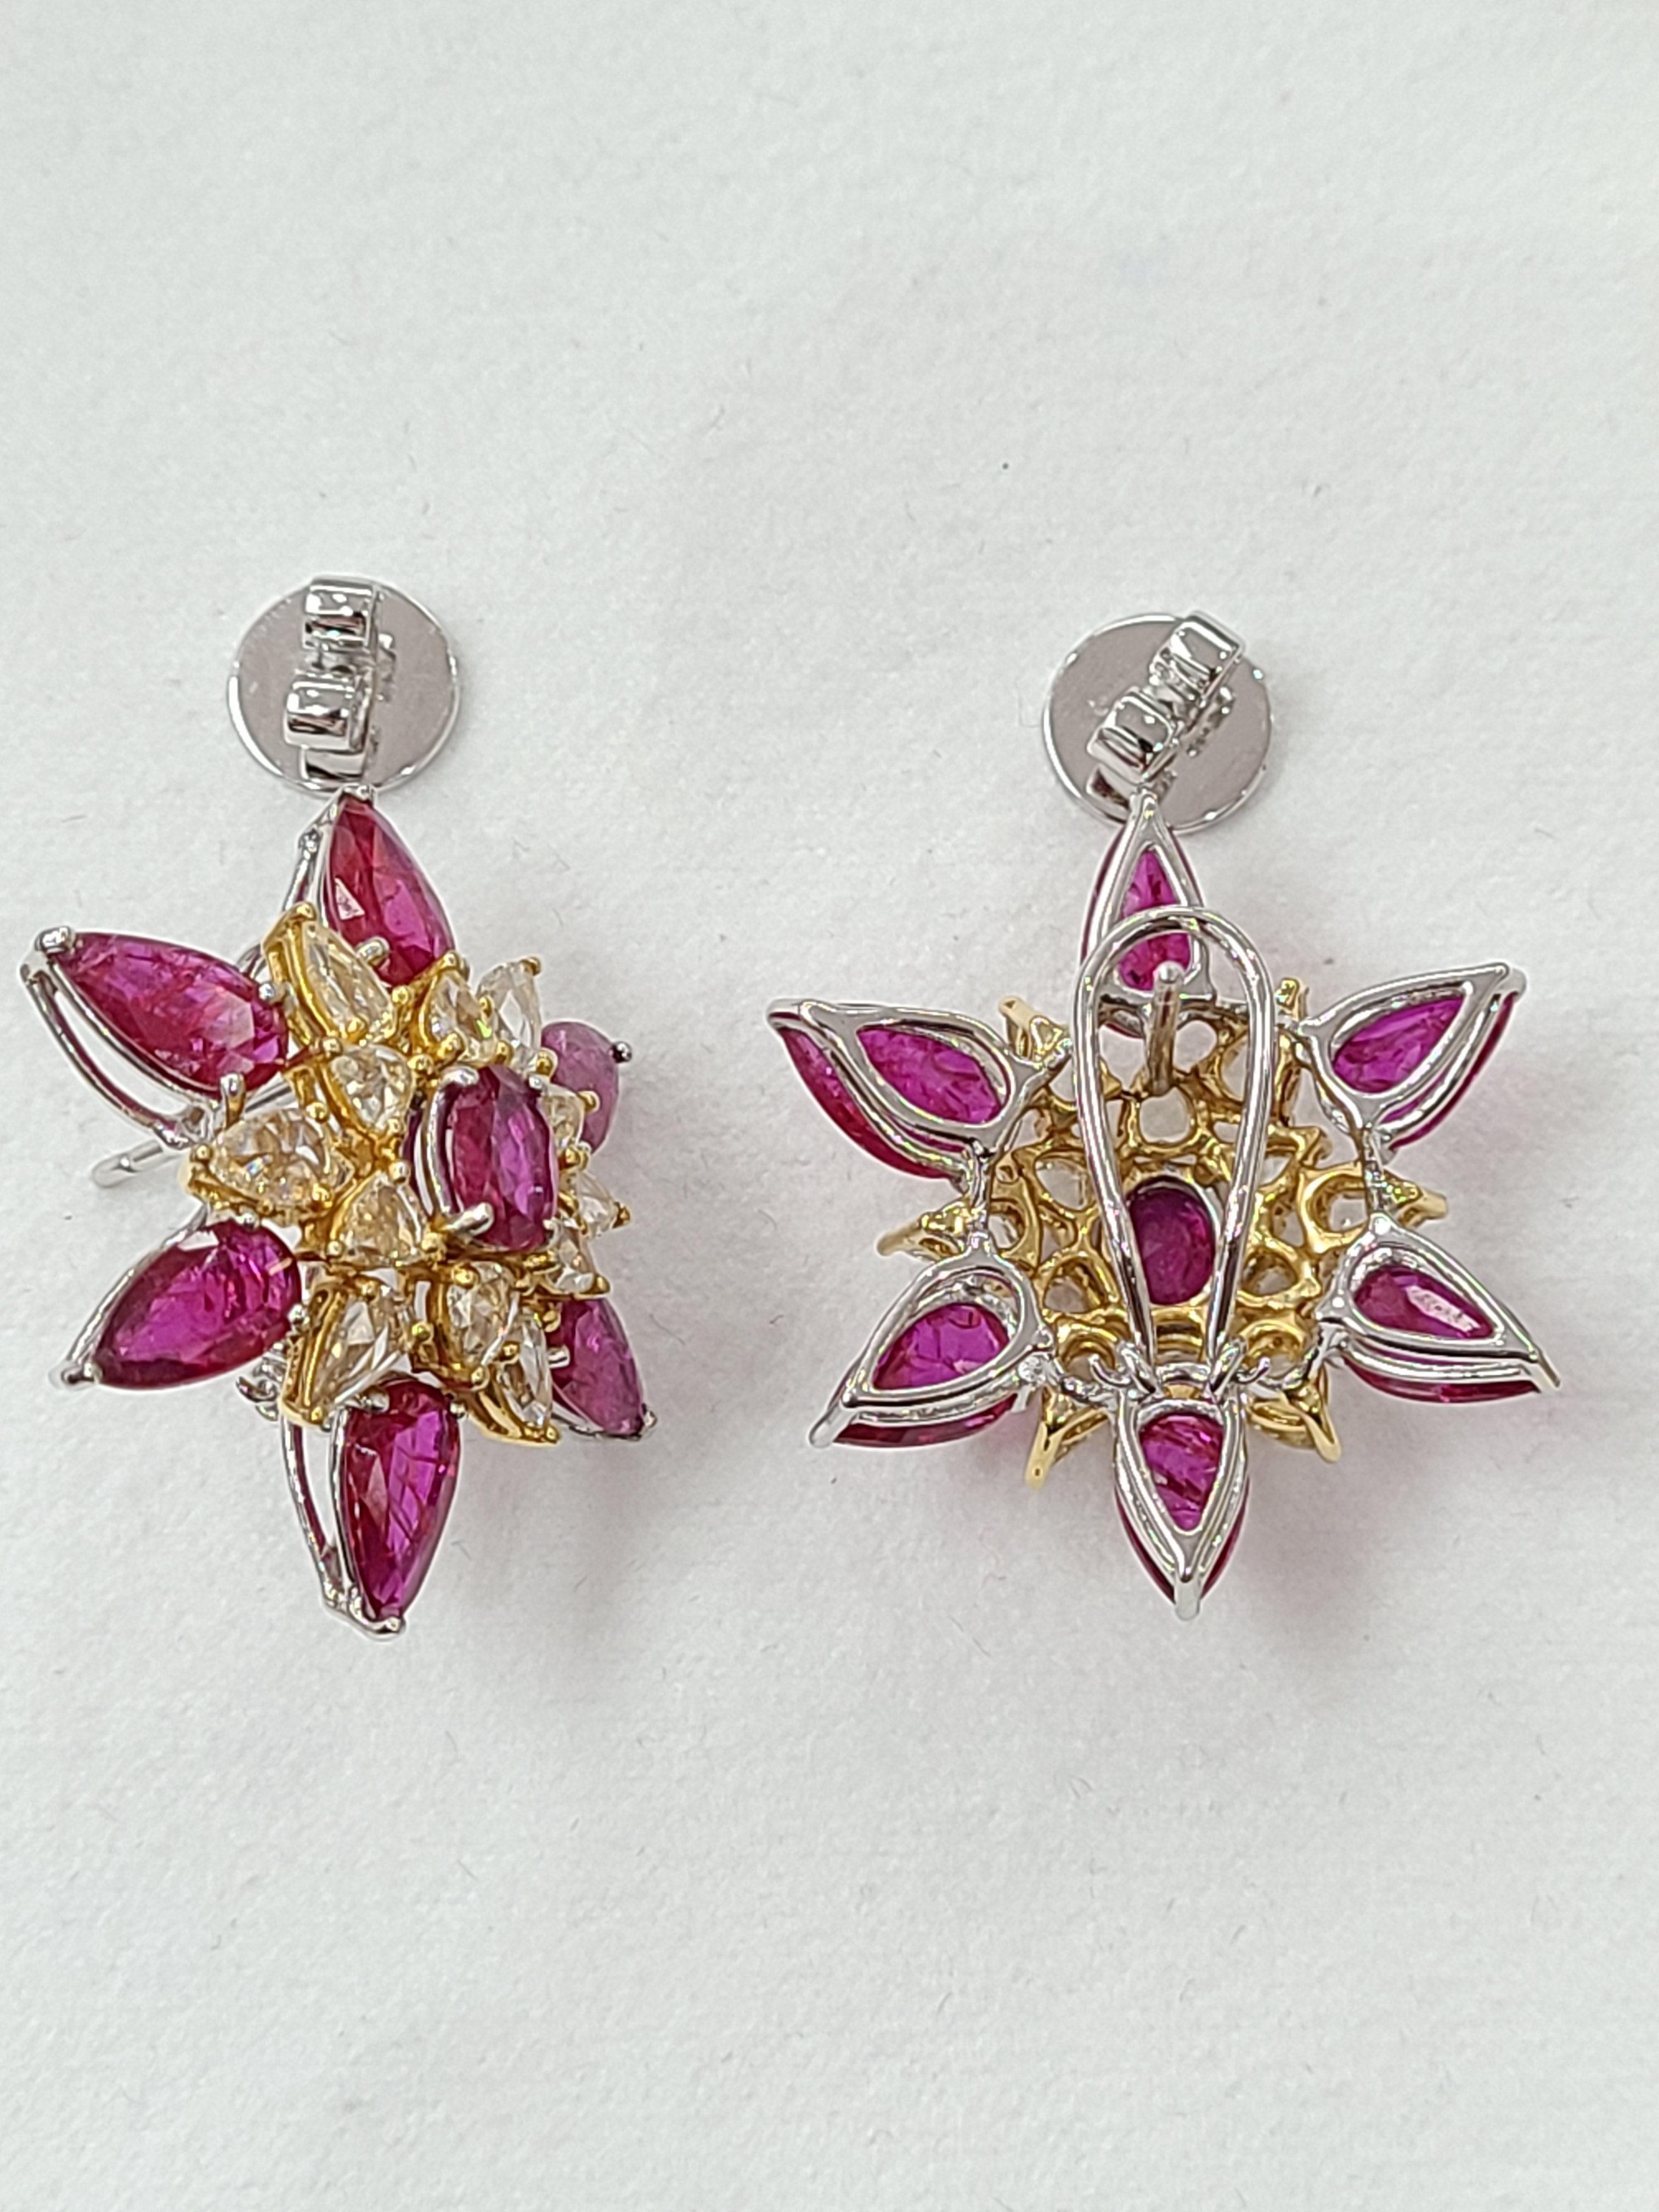 18 Karat Gold Natural Ruby Earrings with Rose Cut Diamonds For Sale 2